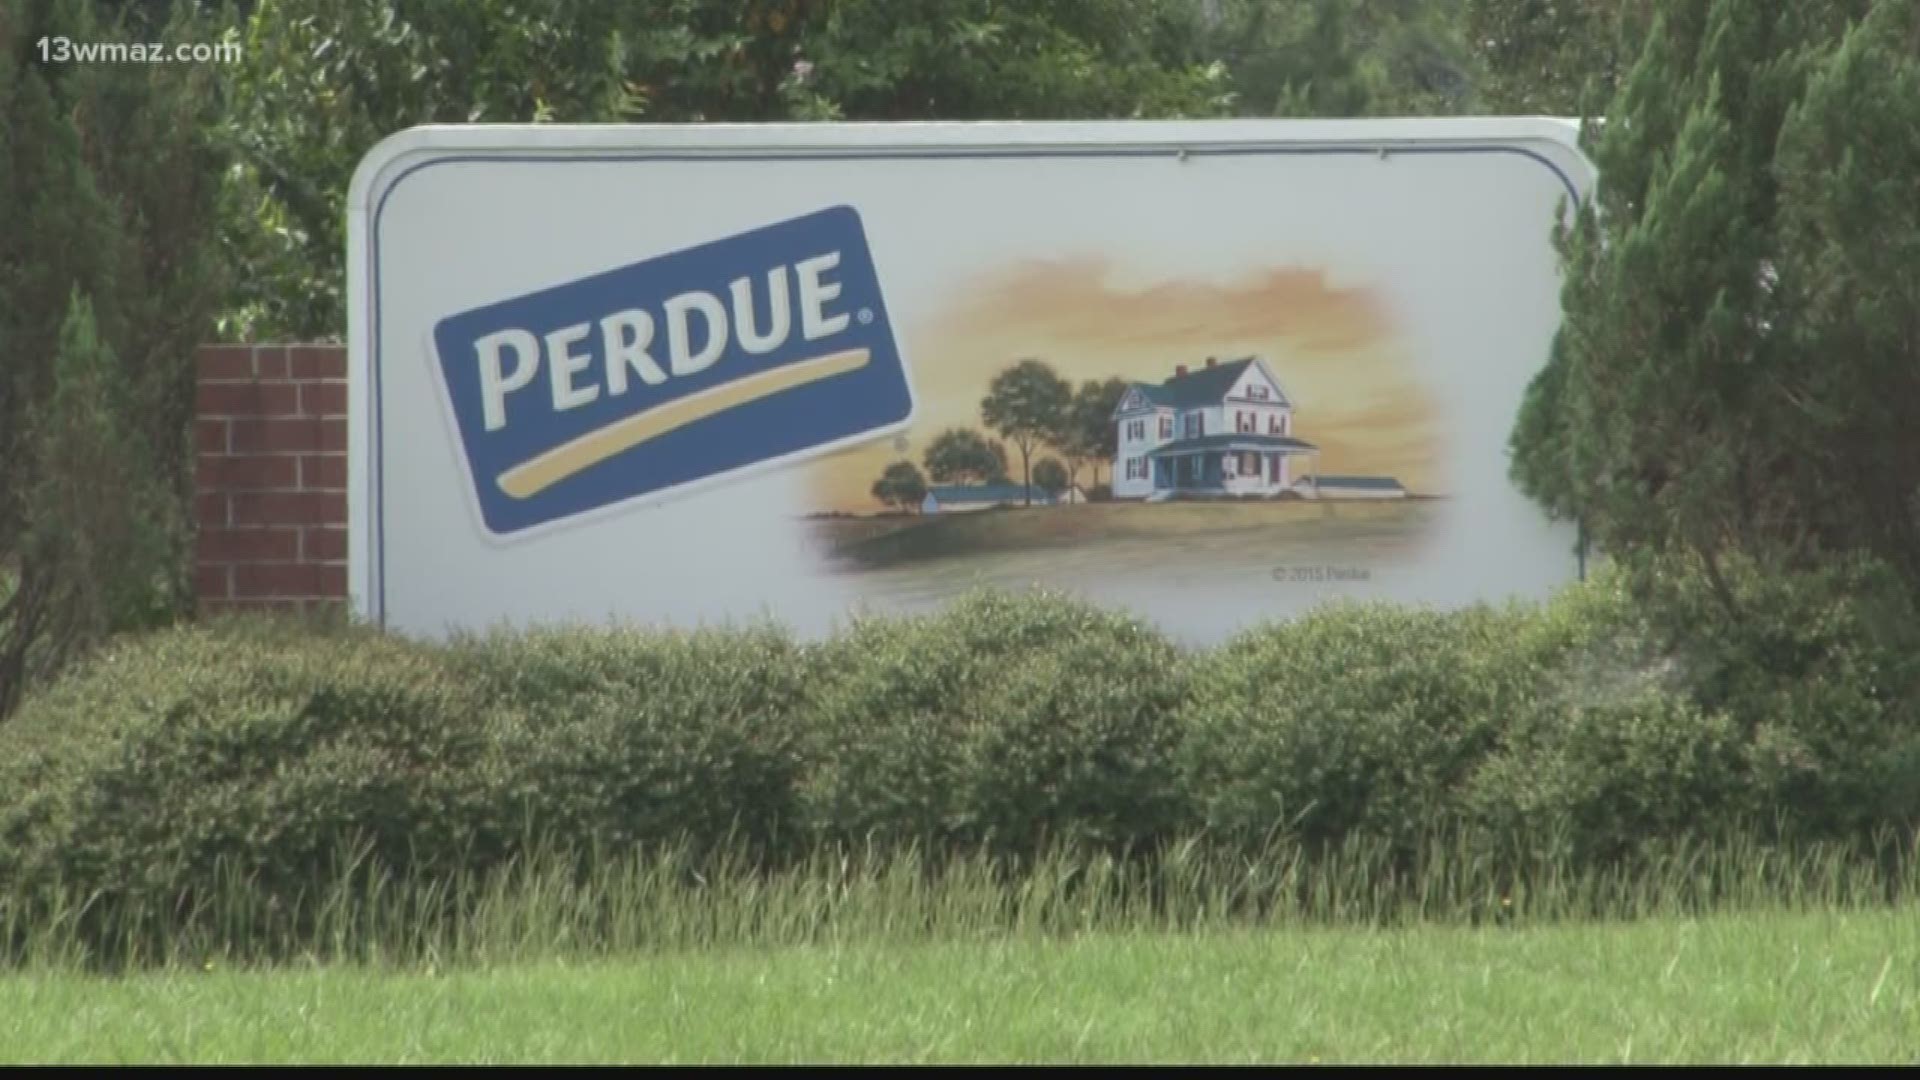 Perdue Farms is partnering with the Bibb County Schools to give students a shot at a job at their Perry.chicken plant. Pepper Baker tells us how the program gives young people more career options after high school.